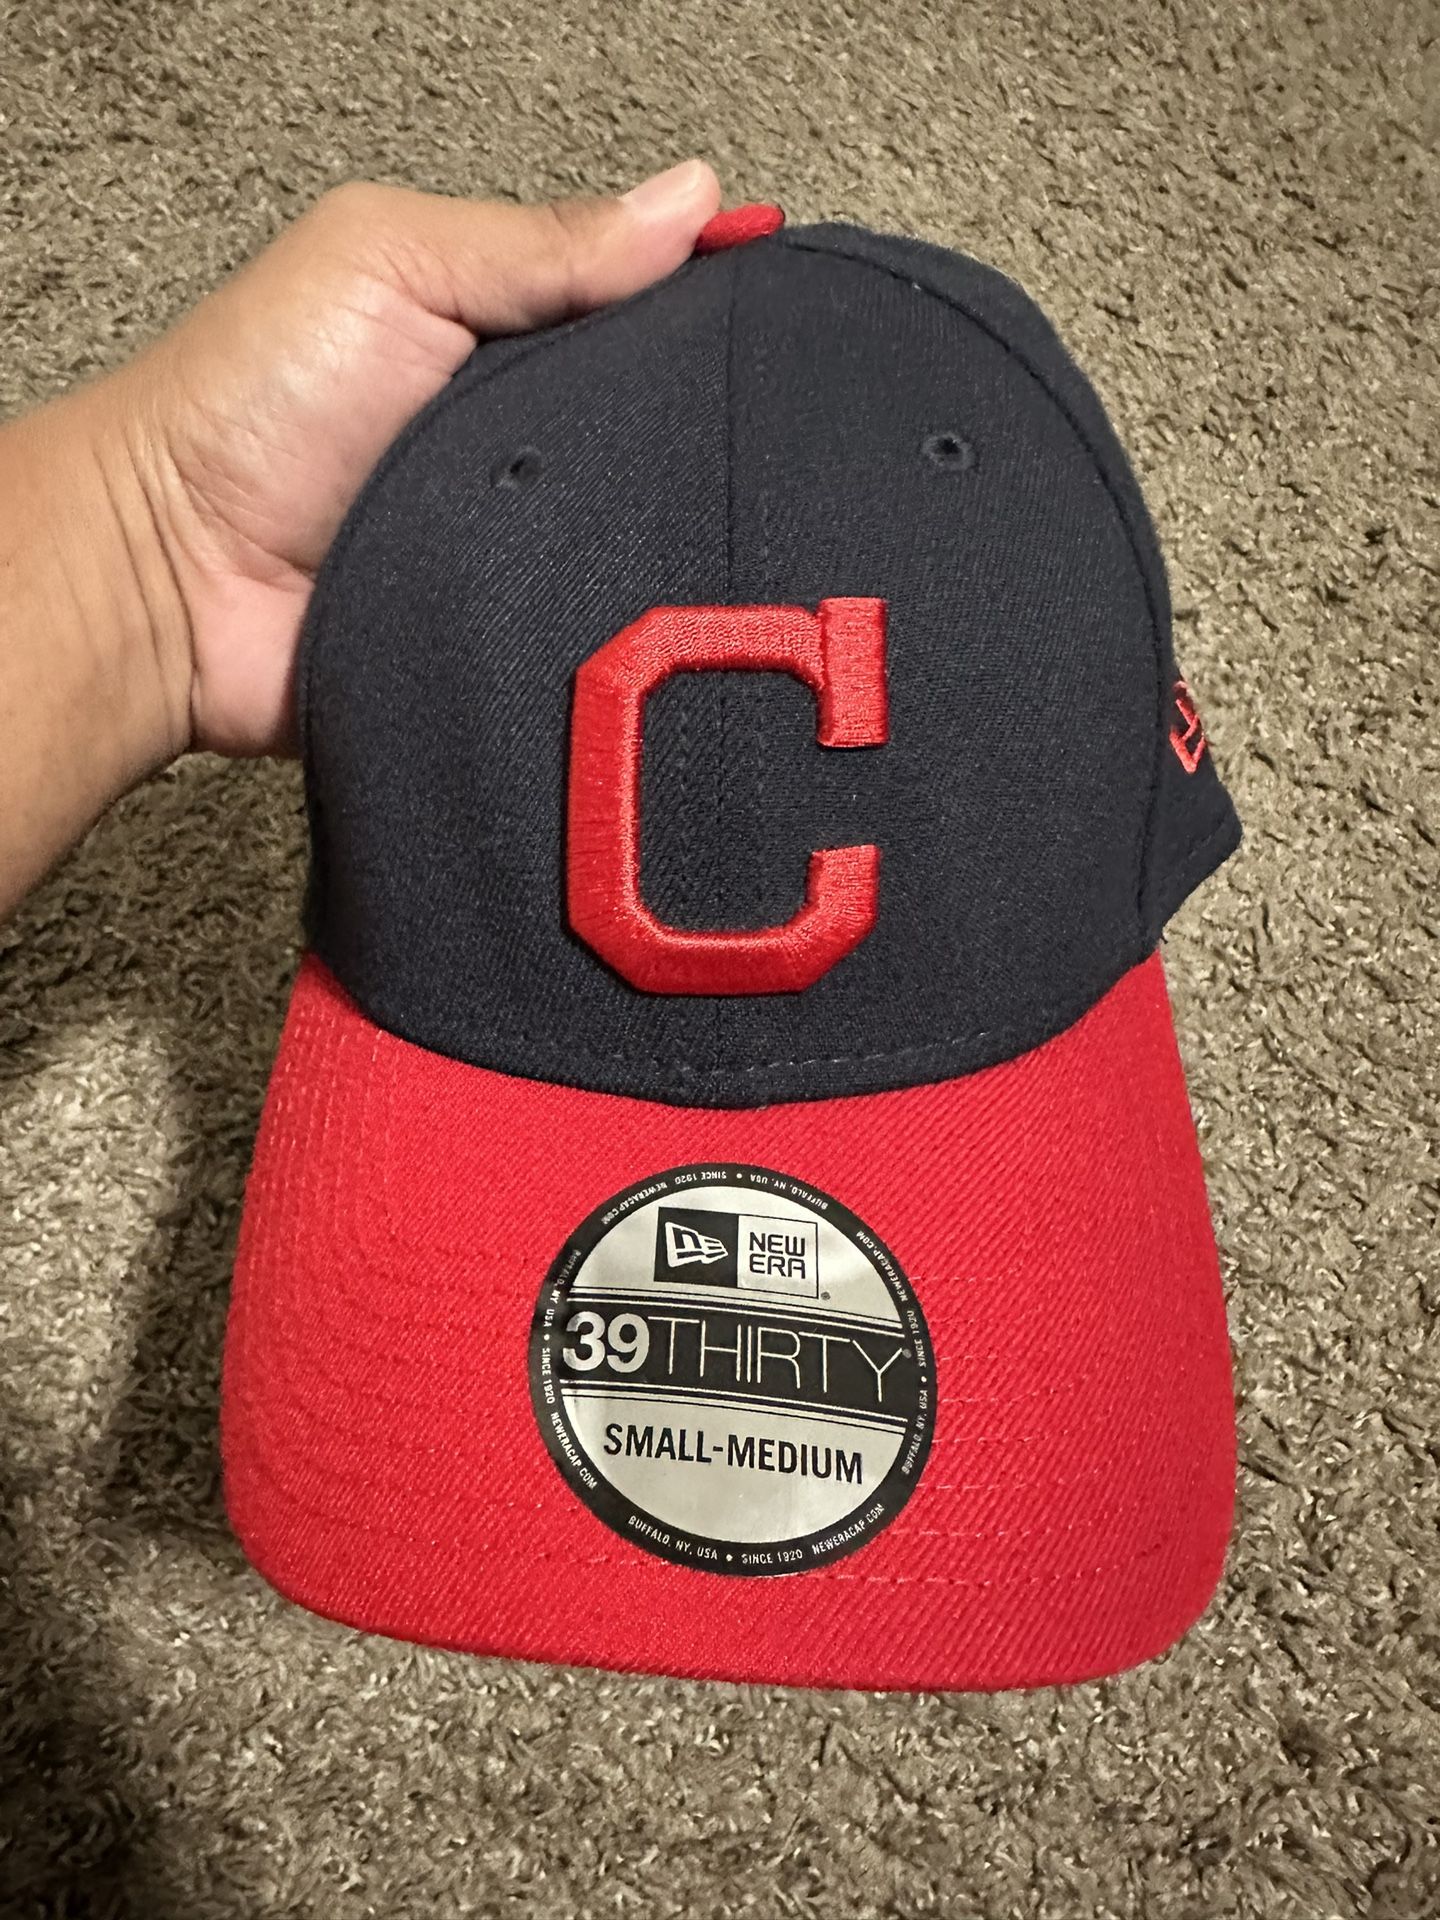 Cleveland Indians Hat for Sale in Santa Paula, CA - OfferUp